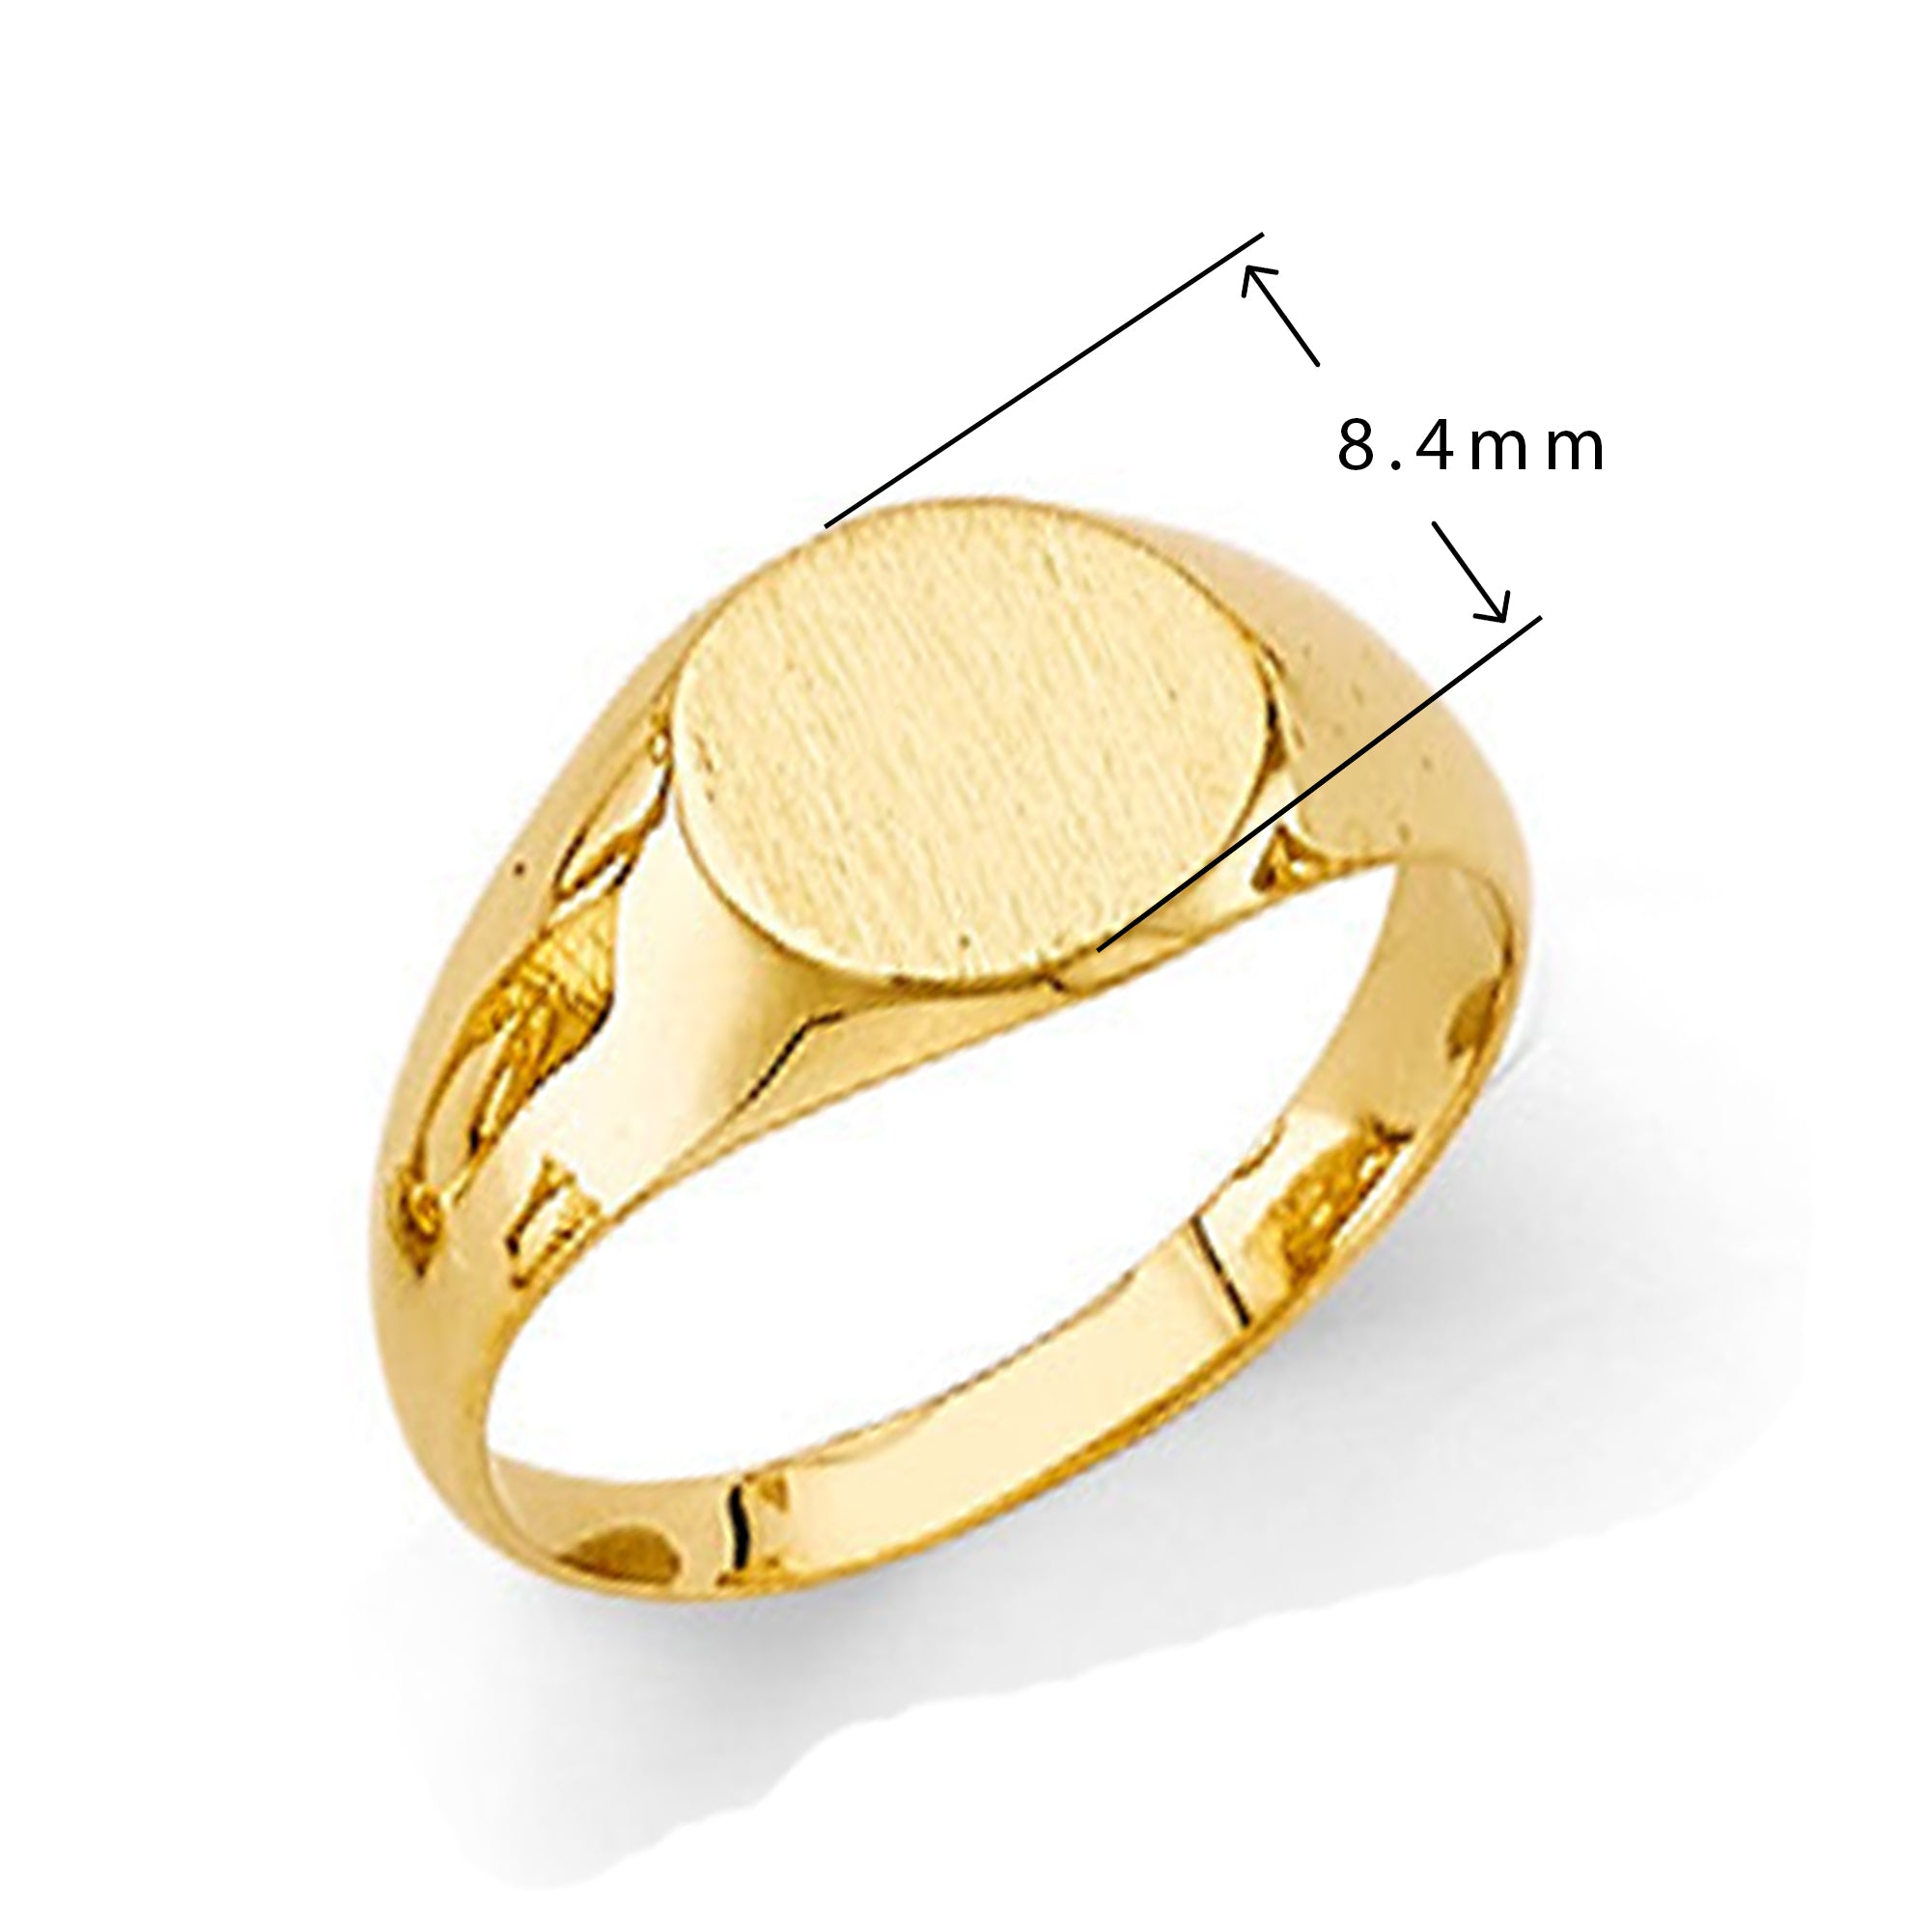 Oval-shaped Casting Ring in Solid Gold with Measurement